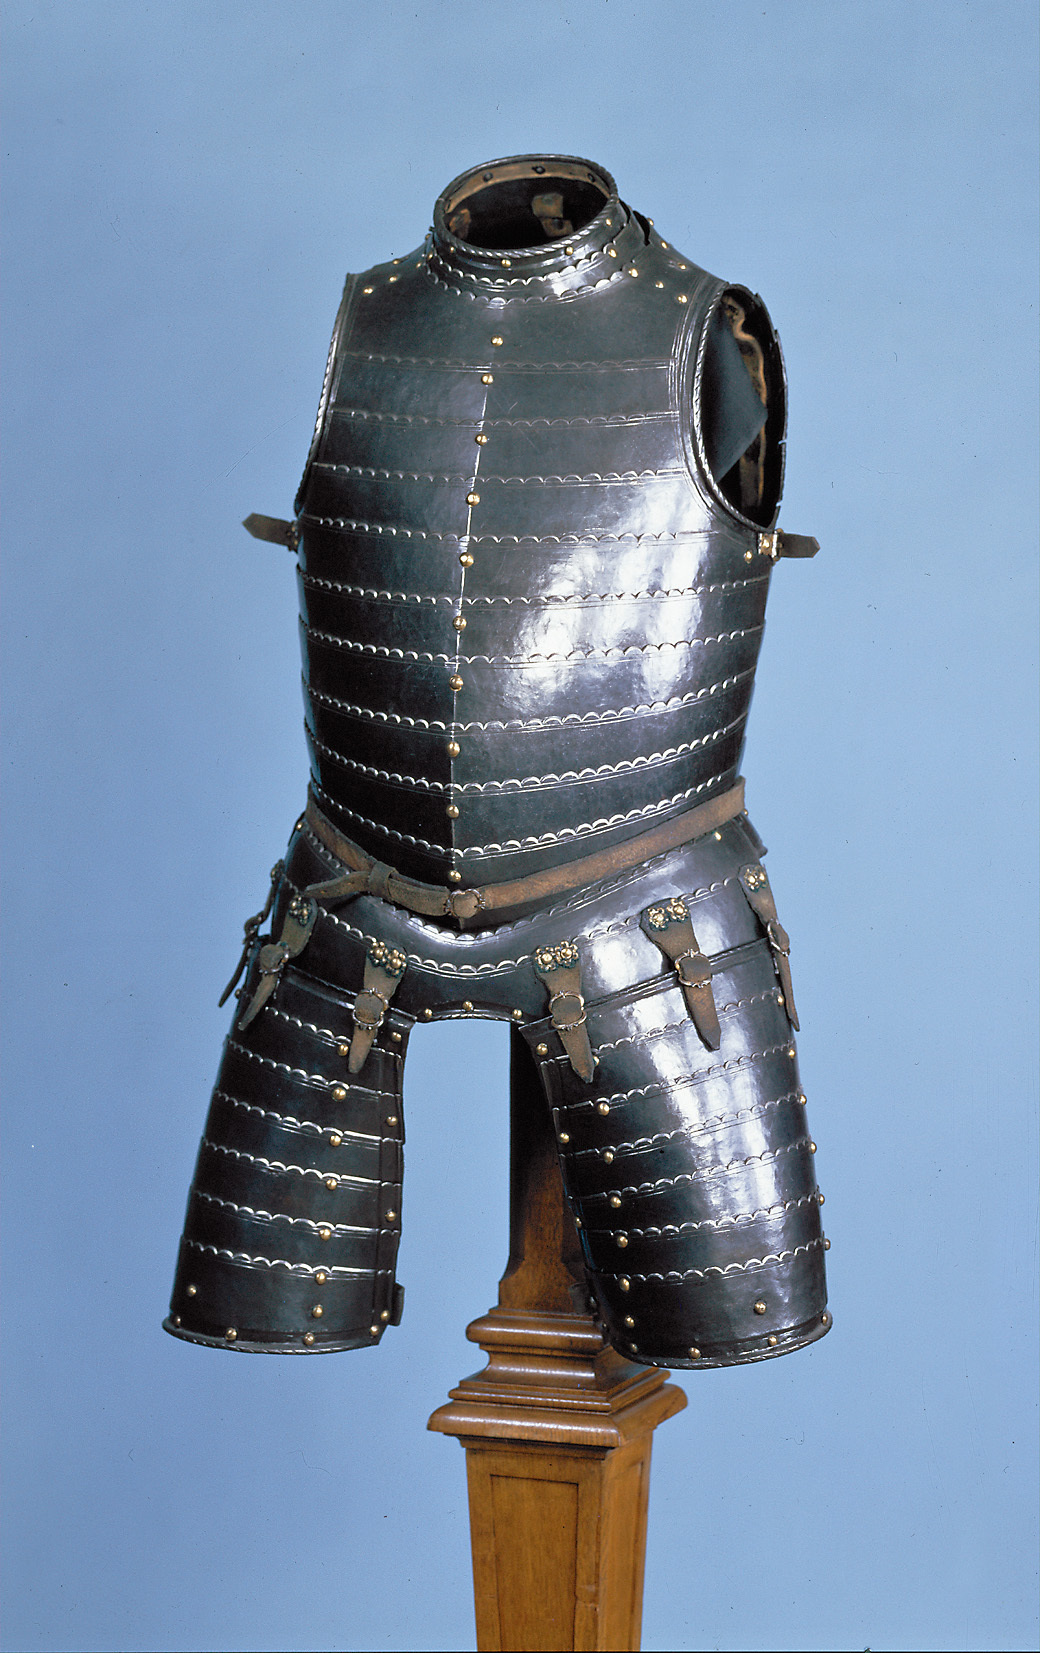 Roman and medieval armor. Which is better? - My, Armor, Antiquity, Middle Ages, Rome, Knights, Weapon, Archeology, Military history, Longpost